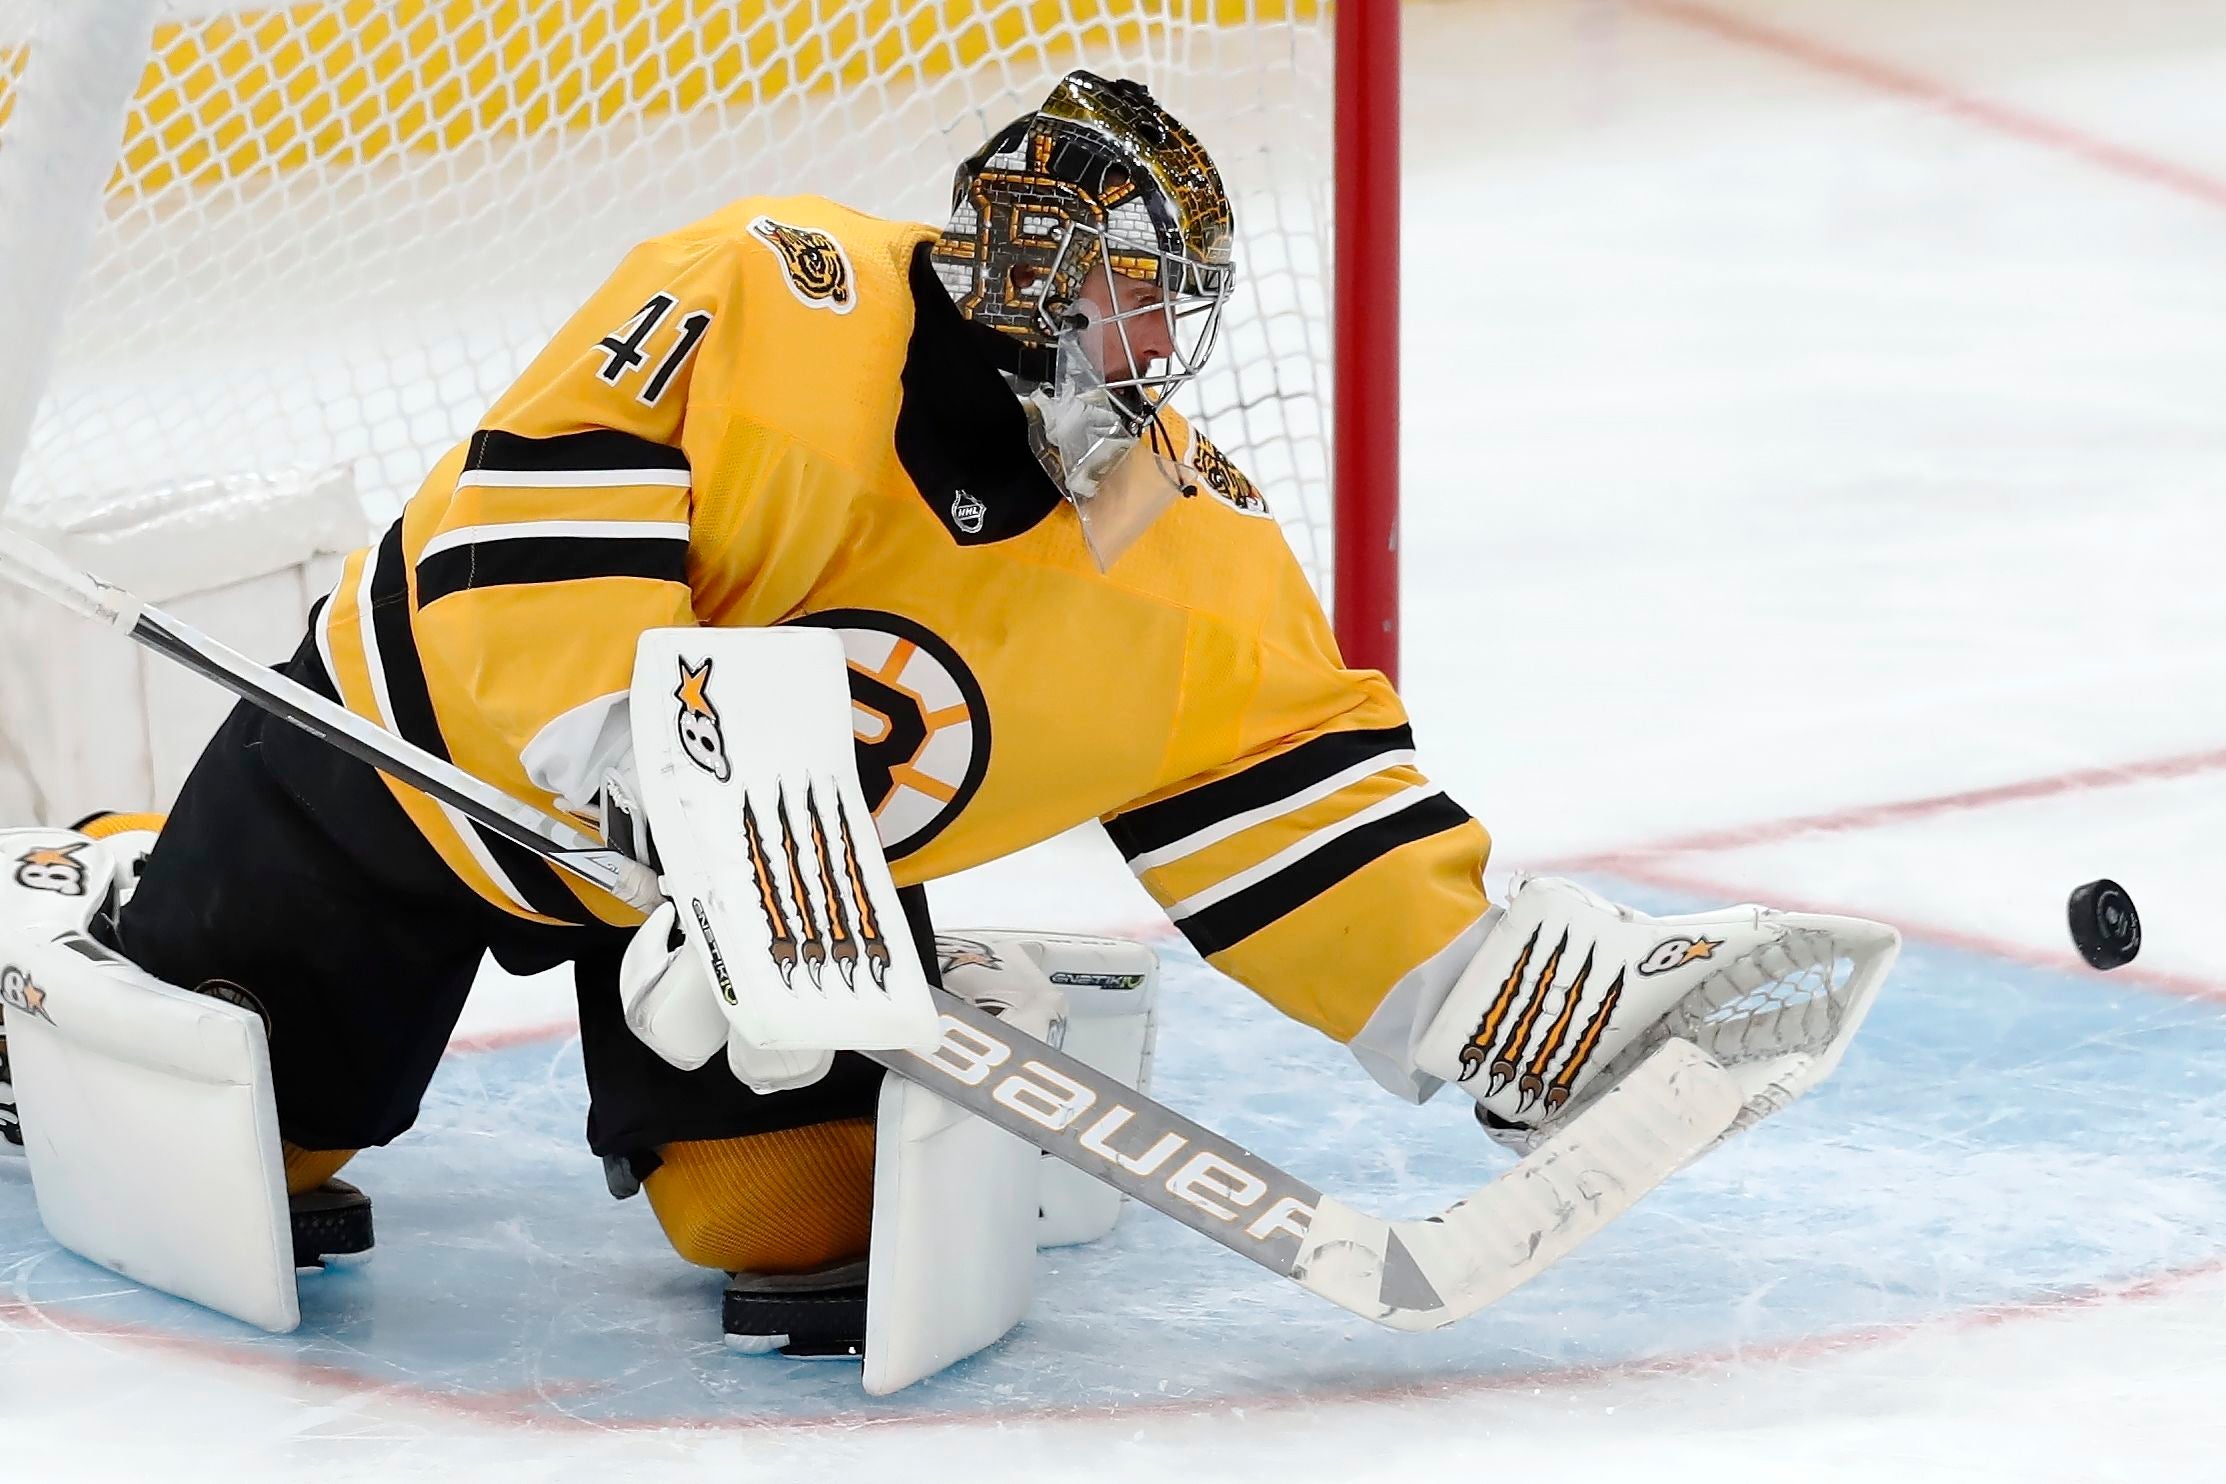 Bruins goalie Tuukka Rask did not practice on Friday and will miss  Saturday's clash against the Rangers.